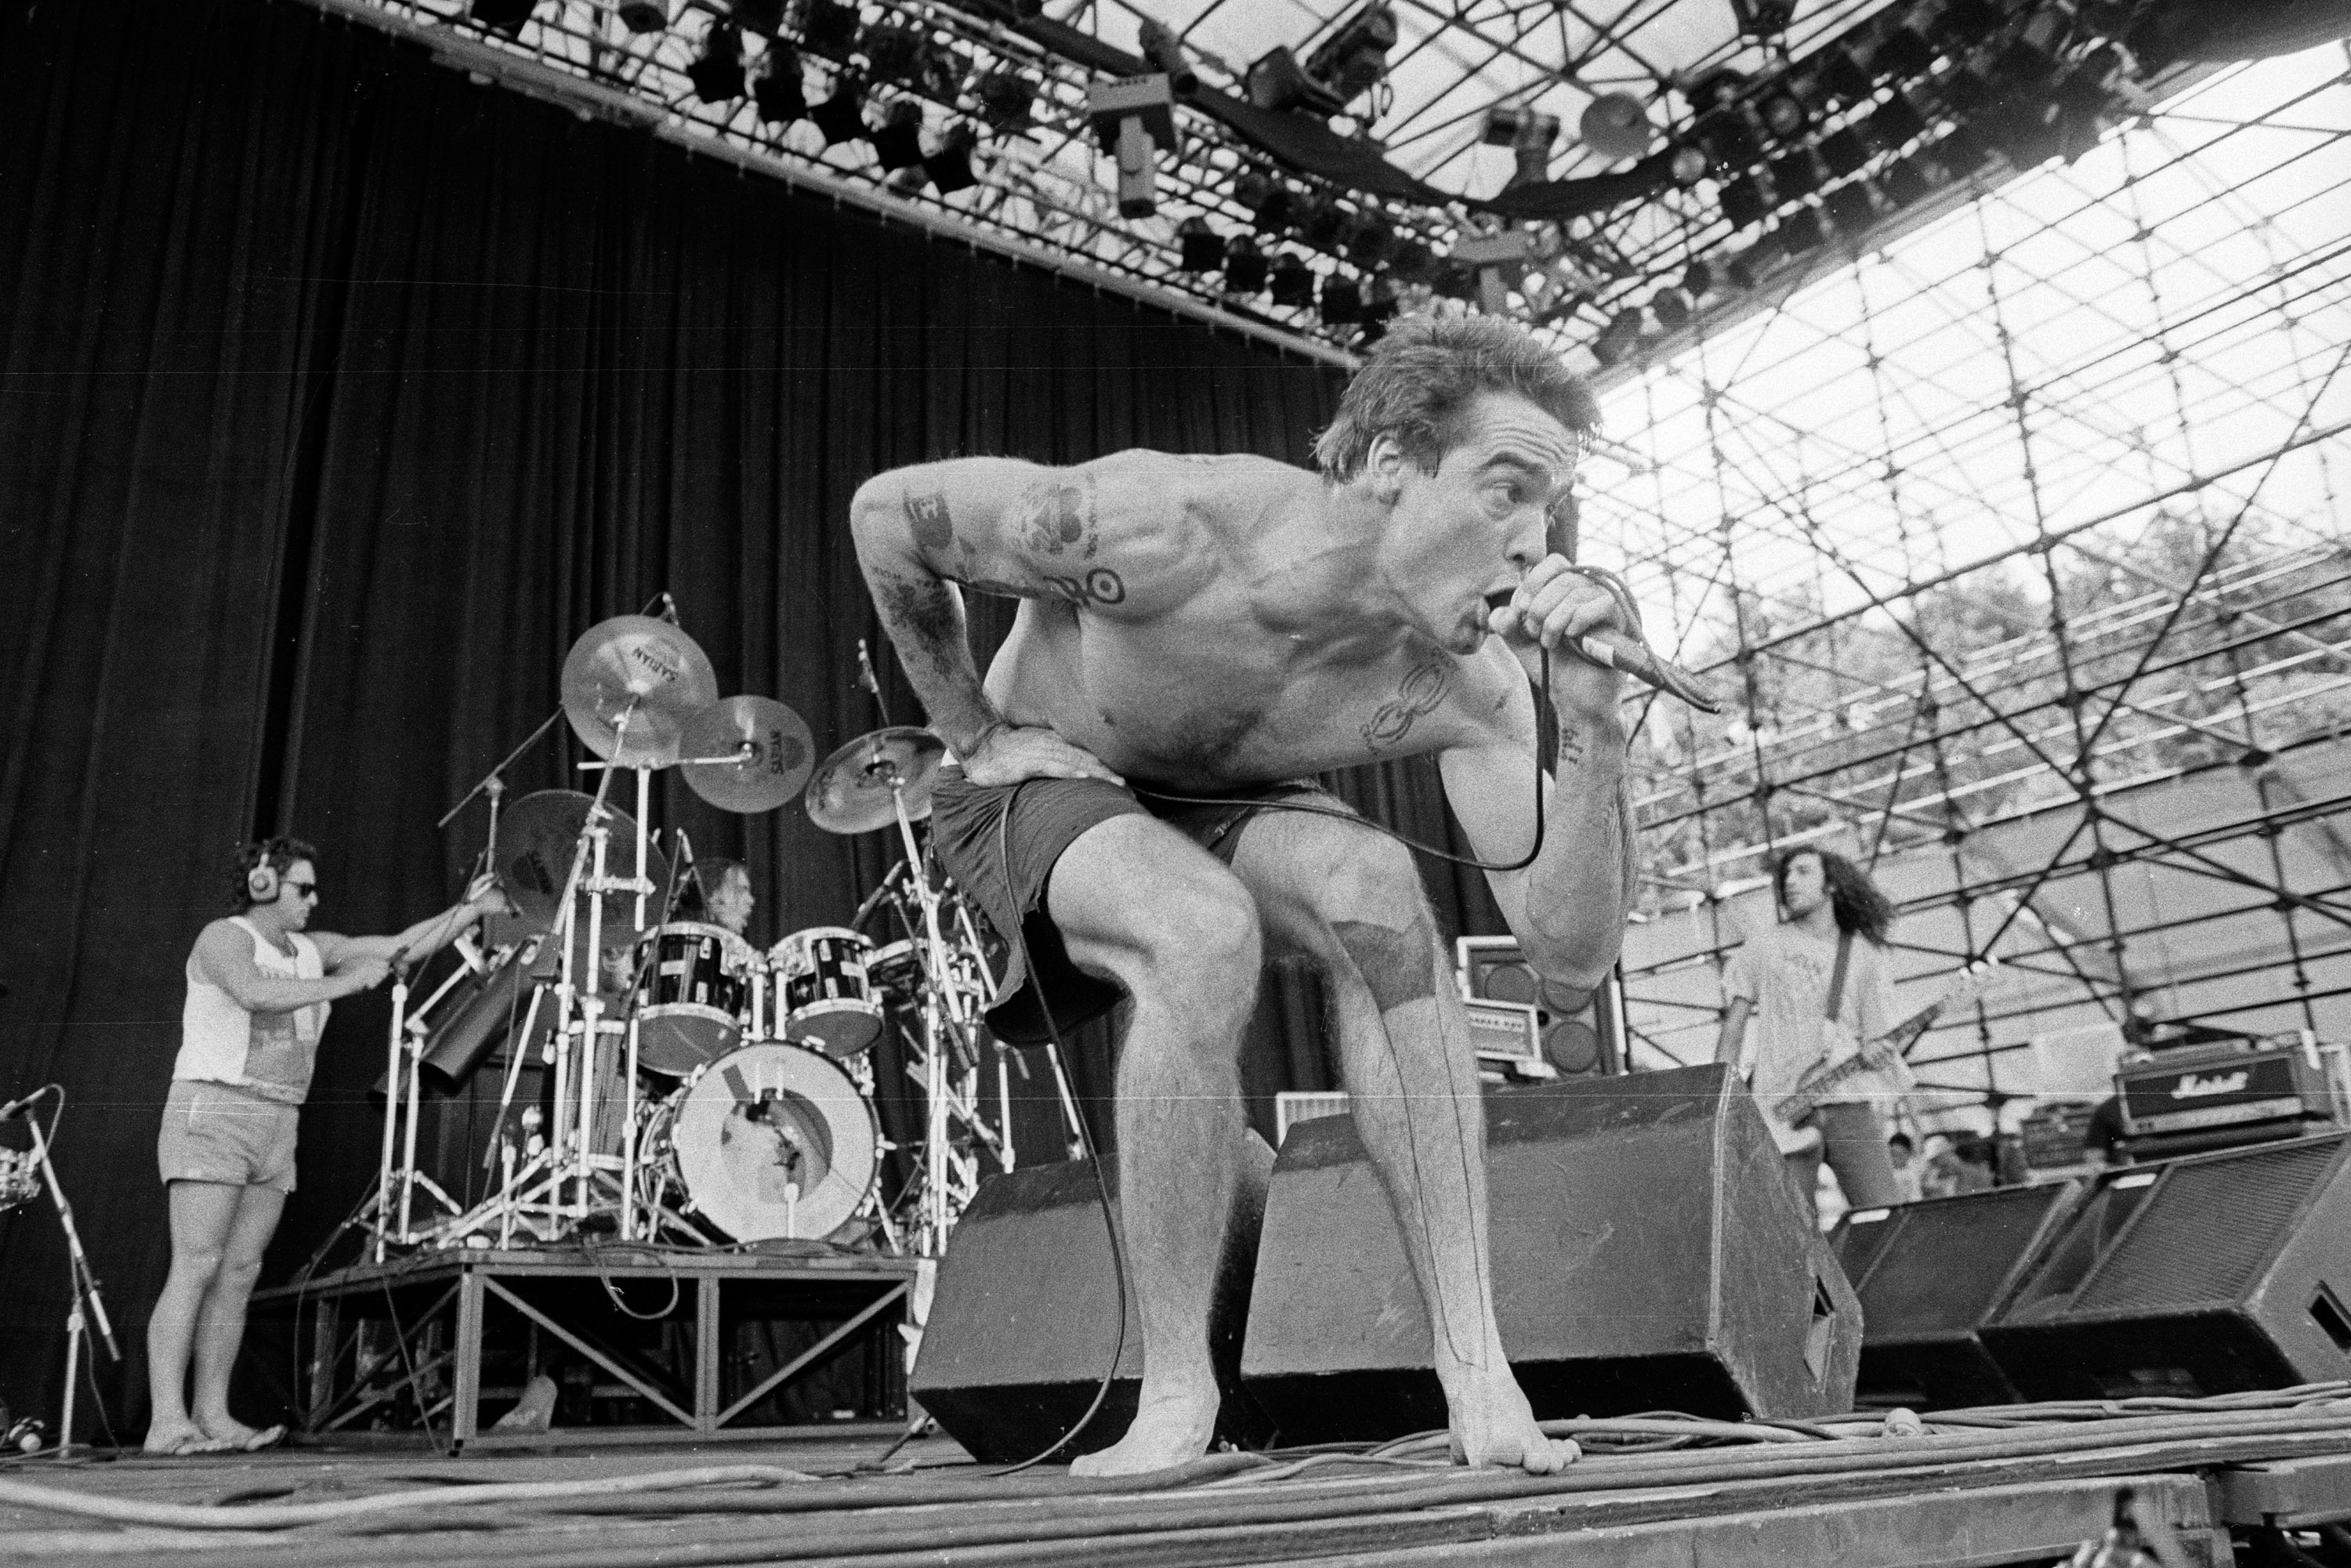 On the Road With Black Flag: Henry Rollins' 1986 Essay